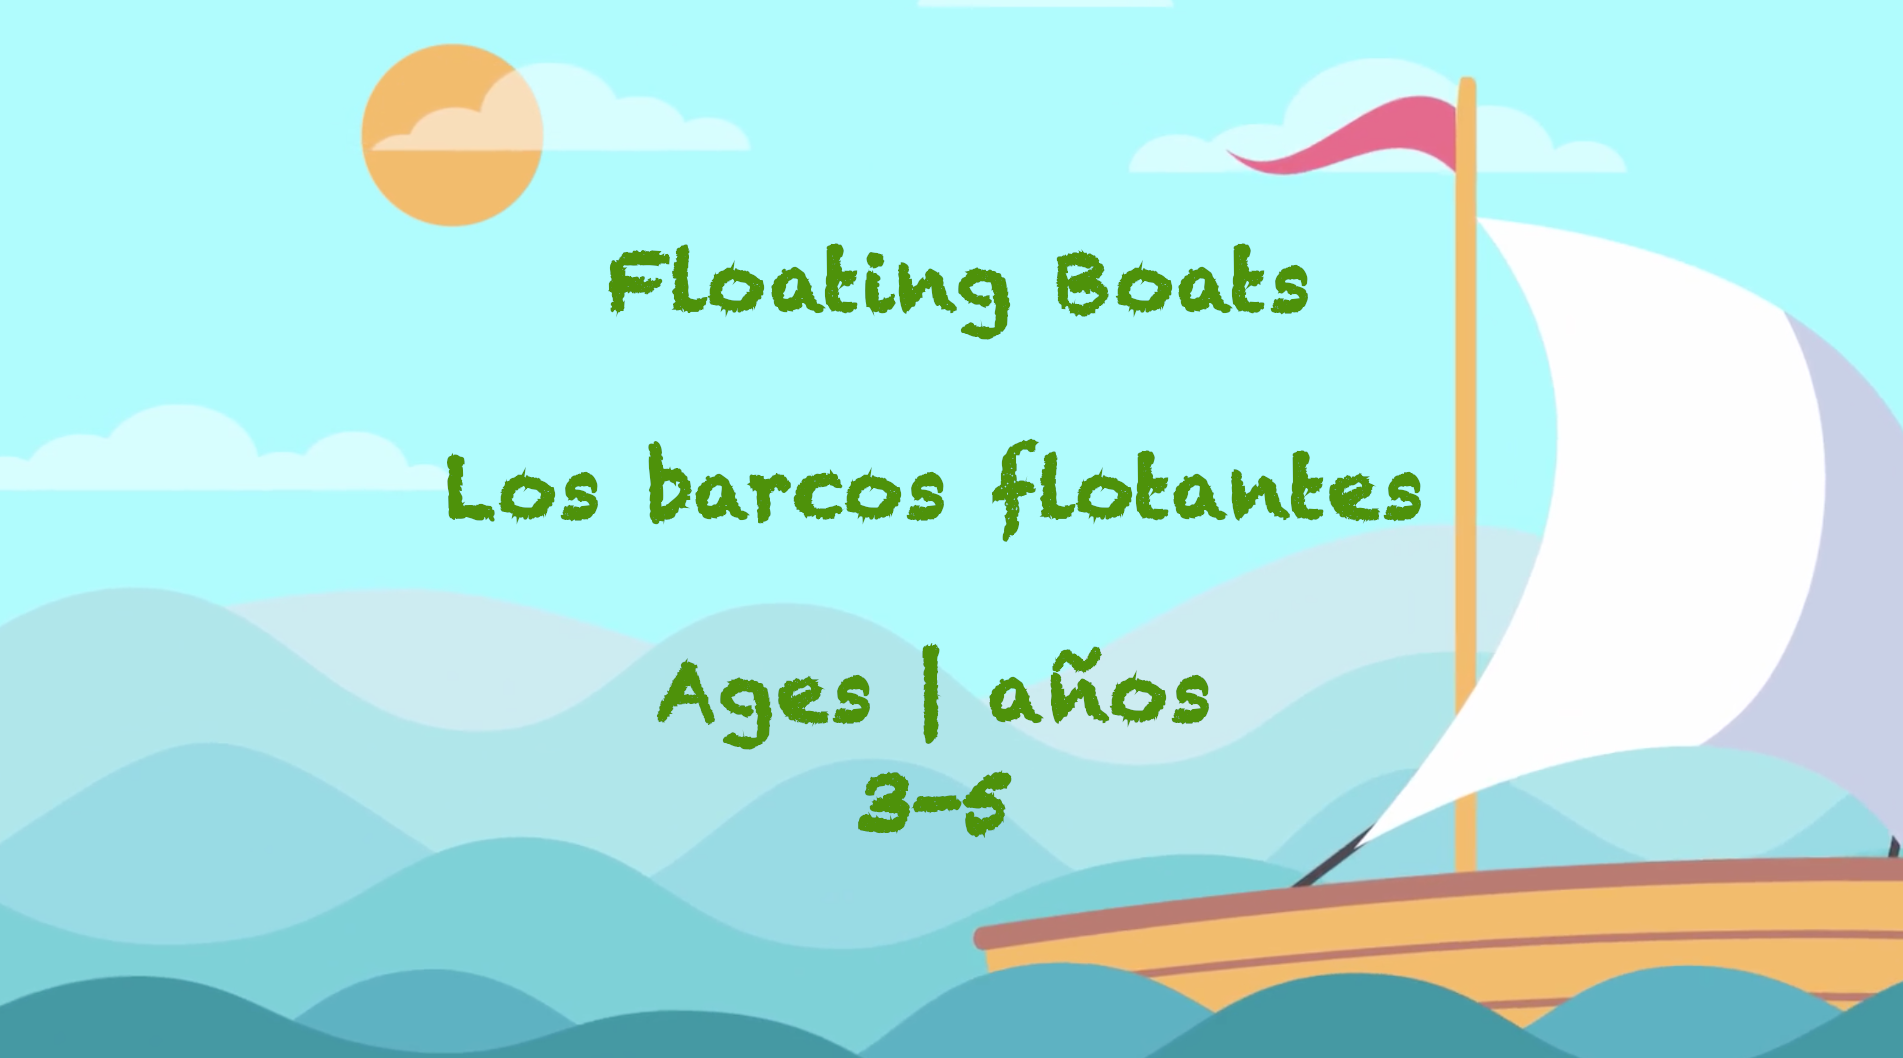 Floating Boats for 3-5 year olds